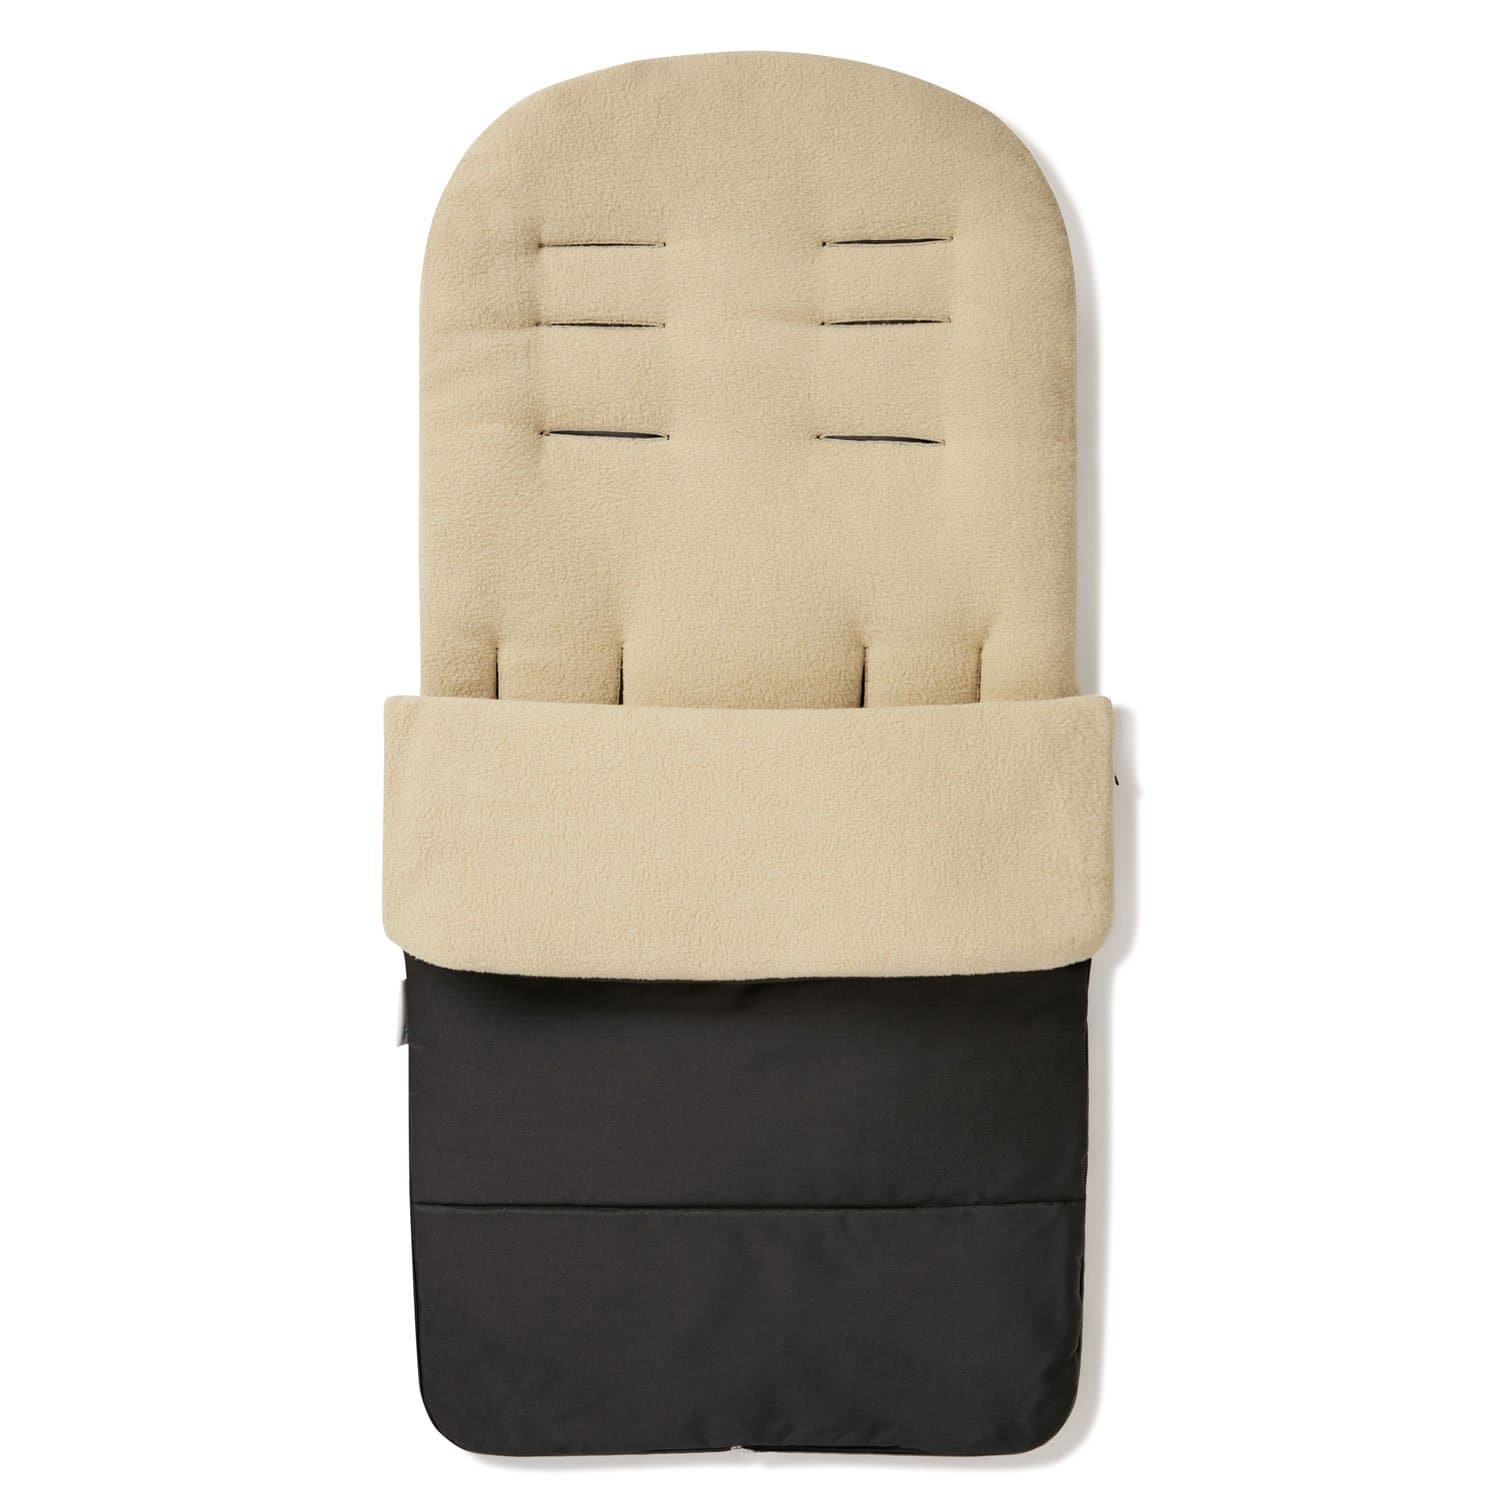 Premium Footmuff / Cosy Toes Compatible with Baby Elegance - Desert Sand / Fits All Models | For Your Little One